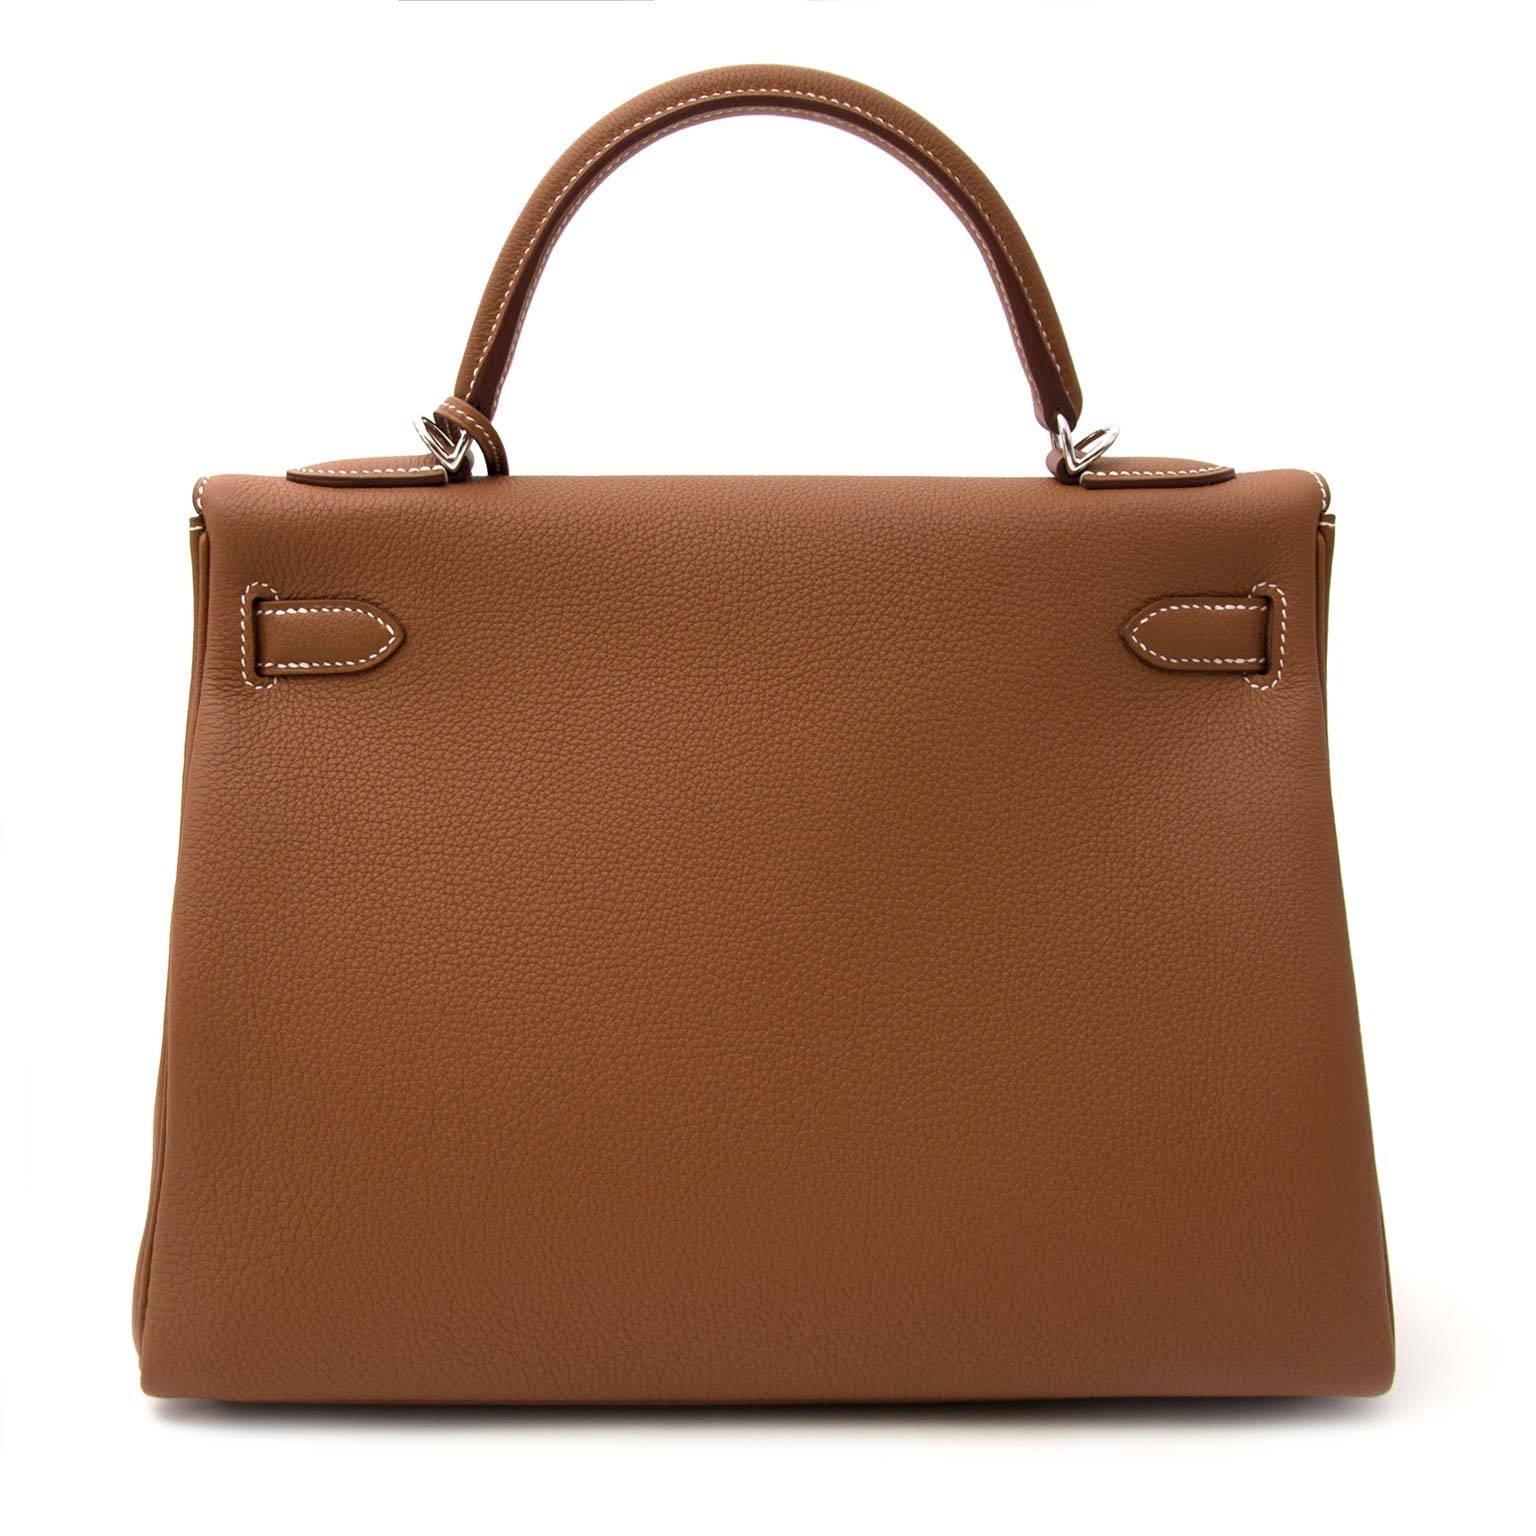 Hermès Kelly 32 Togo Gold PHW

This Hermès Kelly comes in a timeless gold color and is made out of Togo leather which has a smooth and grainy texture. The palladium hardware finishes of the look contrast beautifully with the warm gold leather.

It's